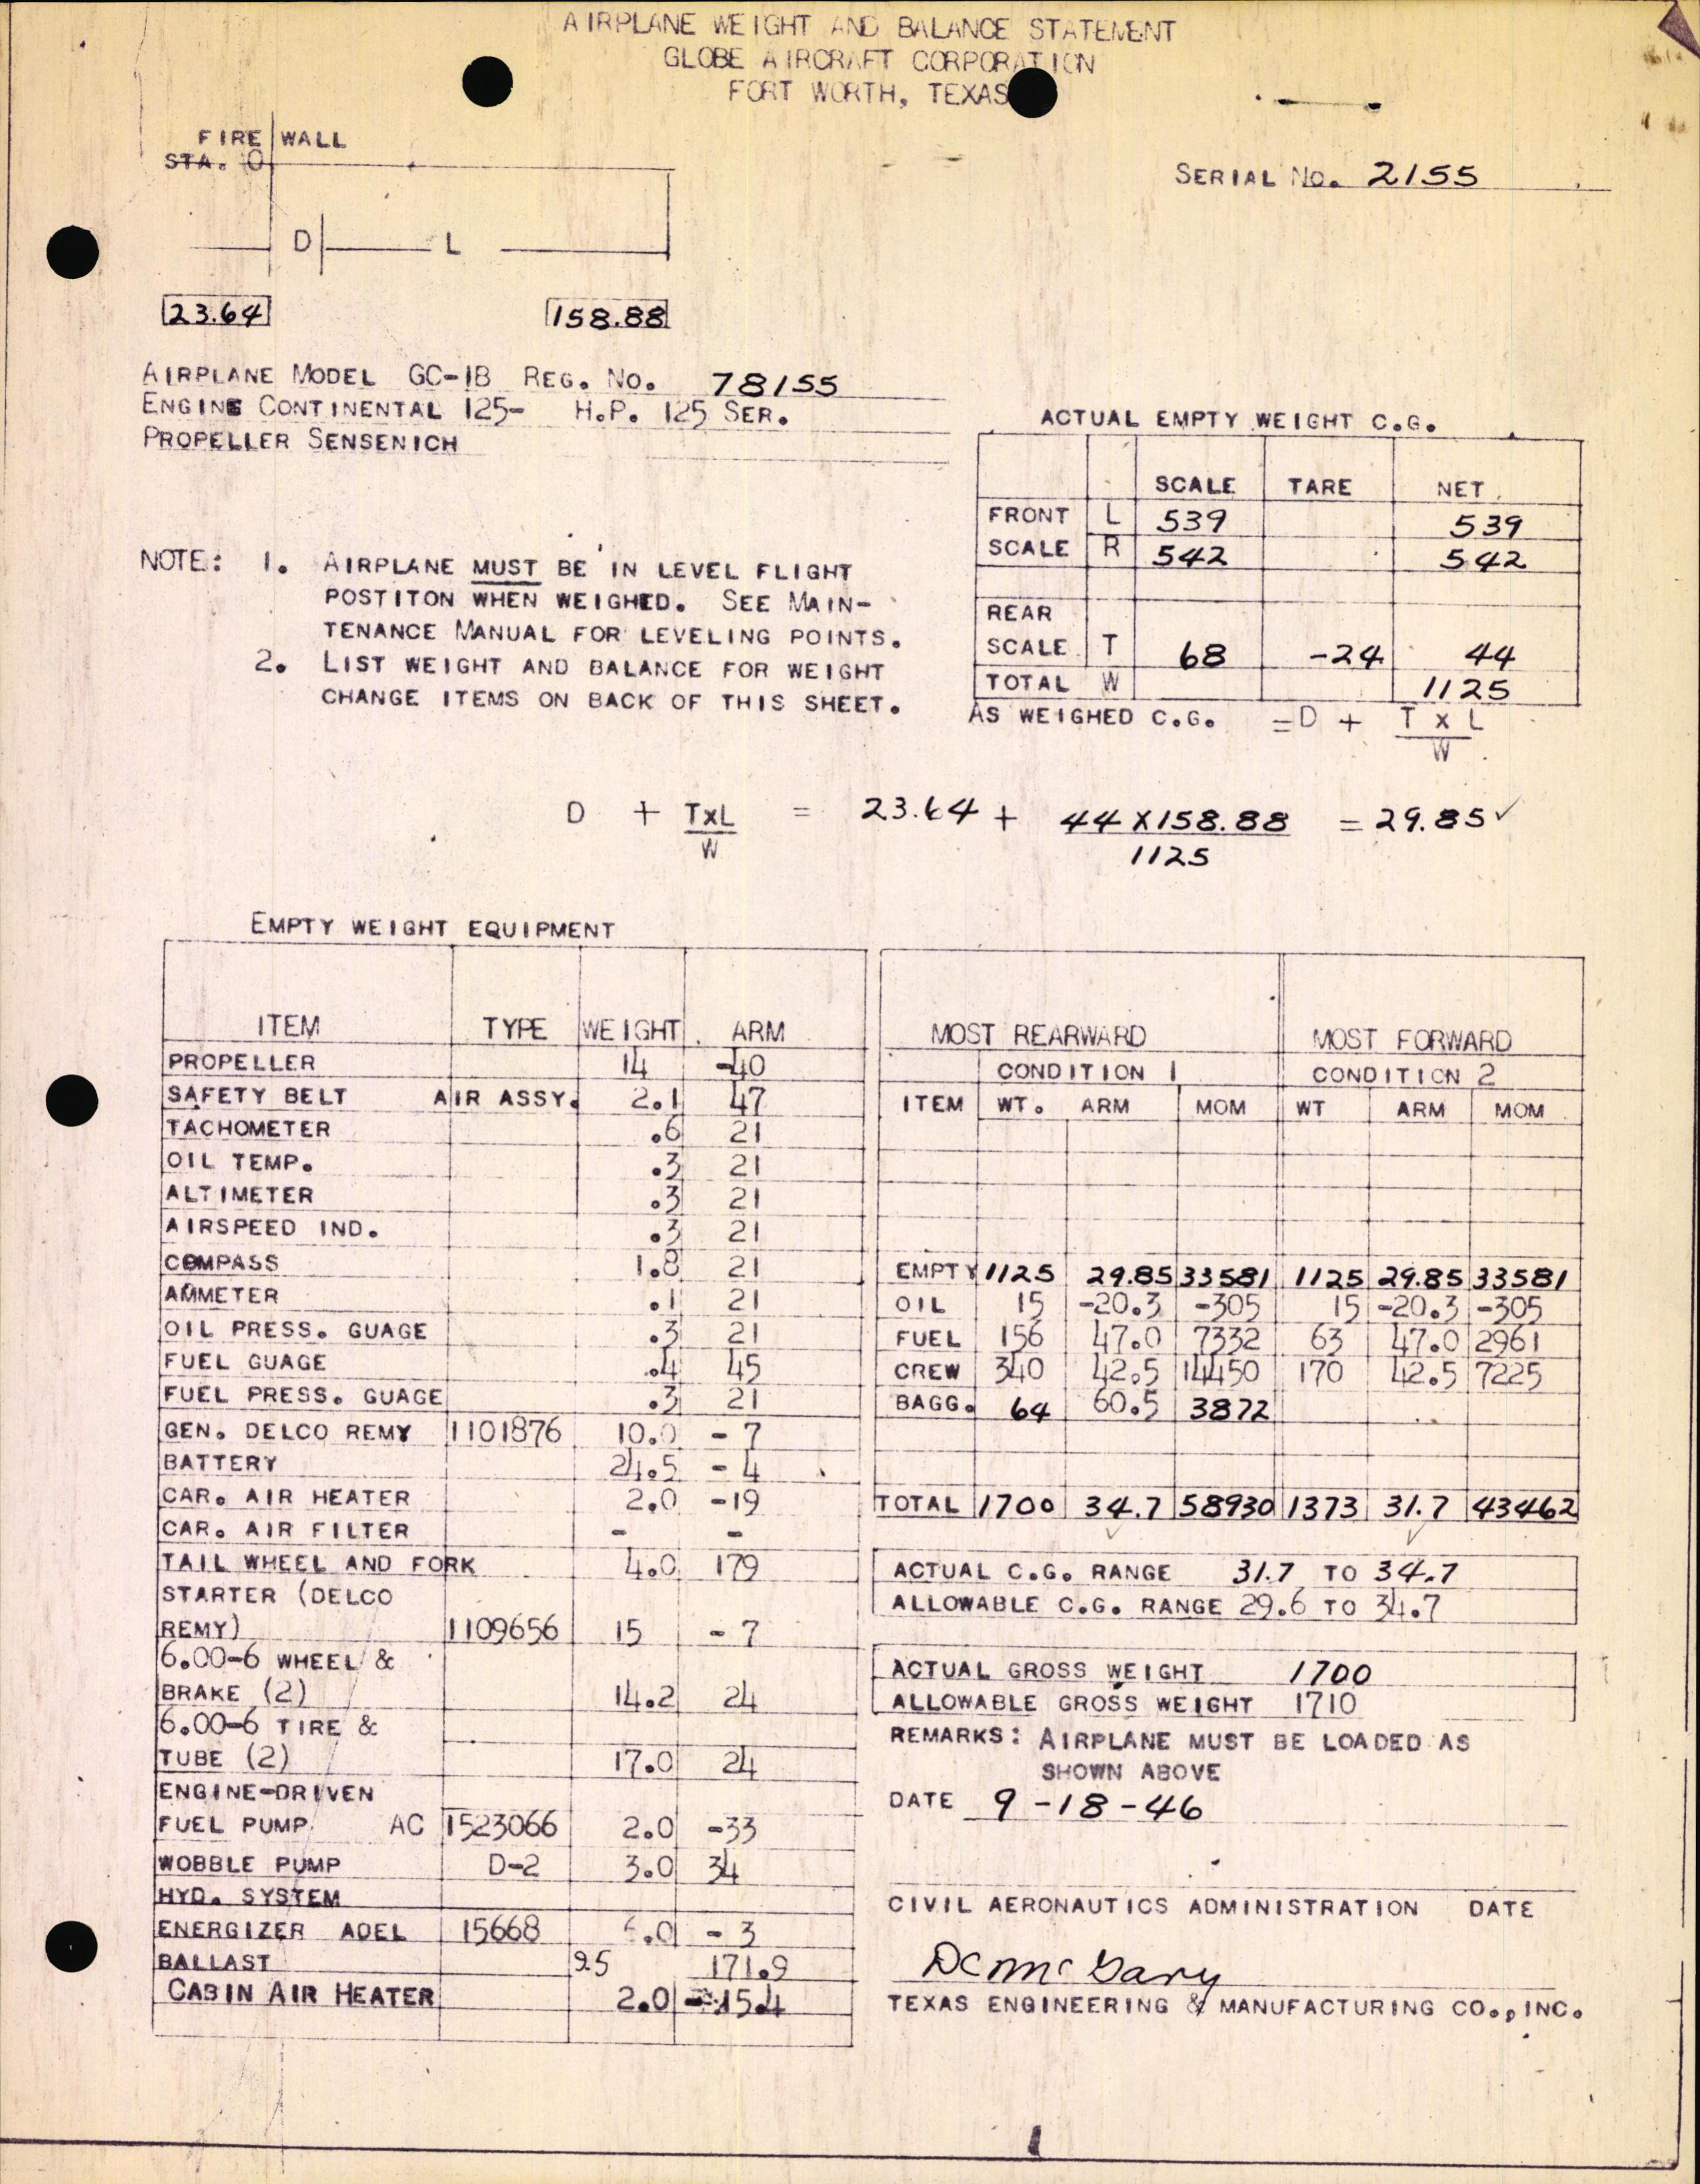 Sample page 1 from AirCorps Library document: Technical Information for Serial Number 2155